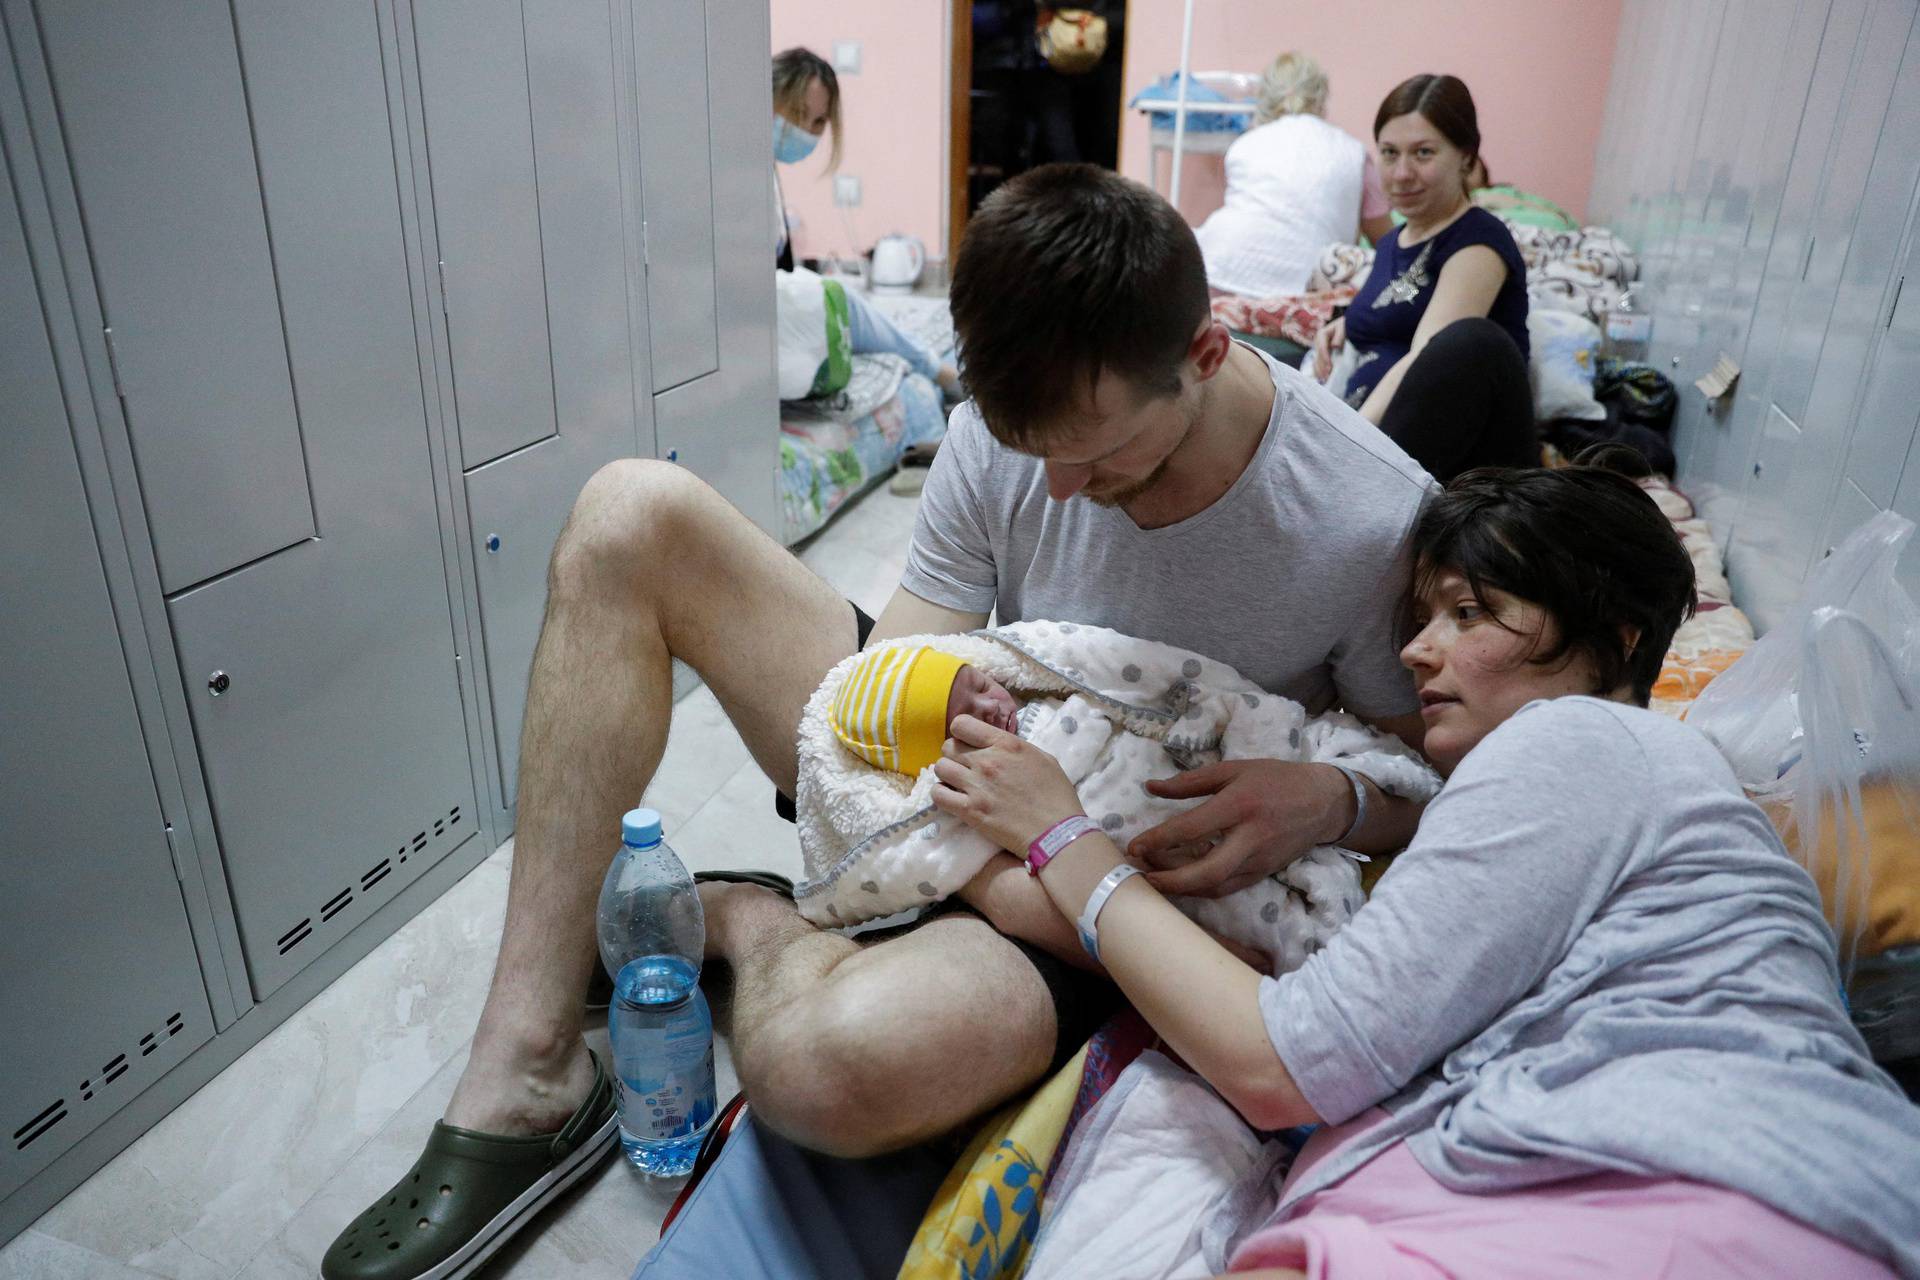 A couple with their newborn baby take shelter in the basement of a perinatal centre as air raid siren sounds are heard amid Russia's invasion of Ukraine, in Kyiv